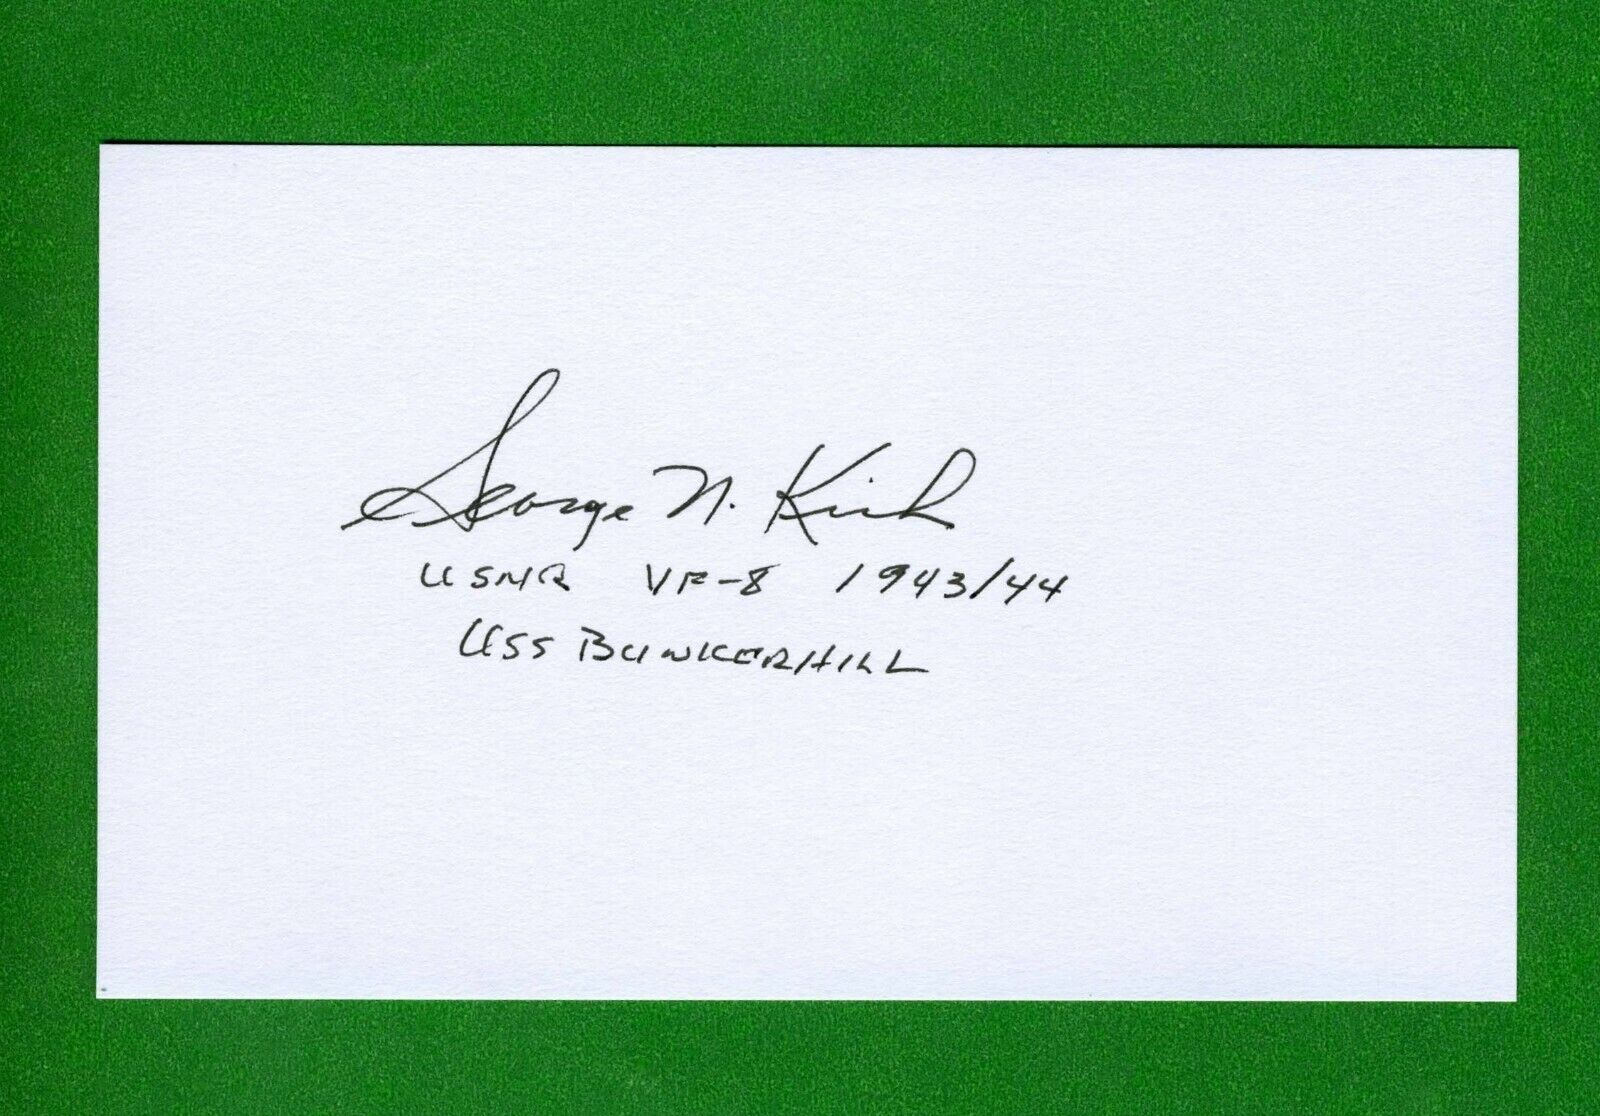 George Kirk WWII Fighter Pilot Ace-7 Kills Signed 3x5 Index Card R0278